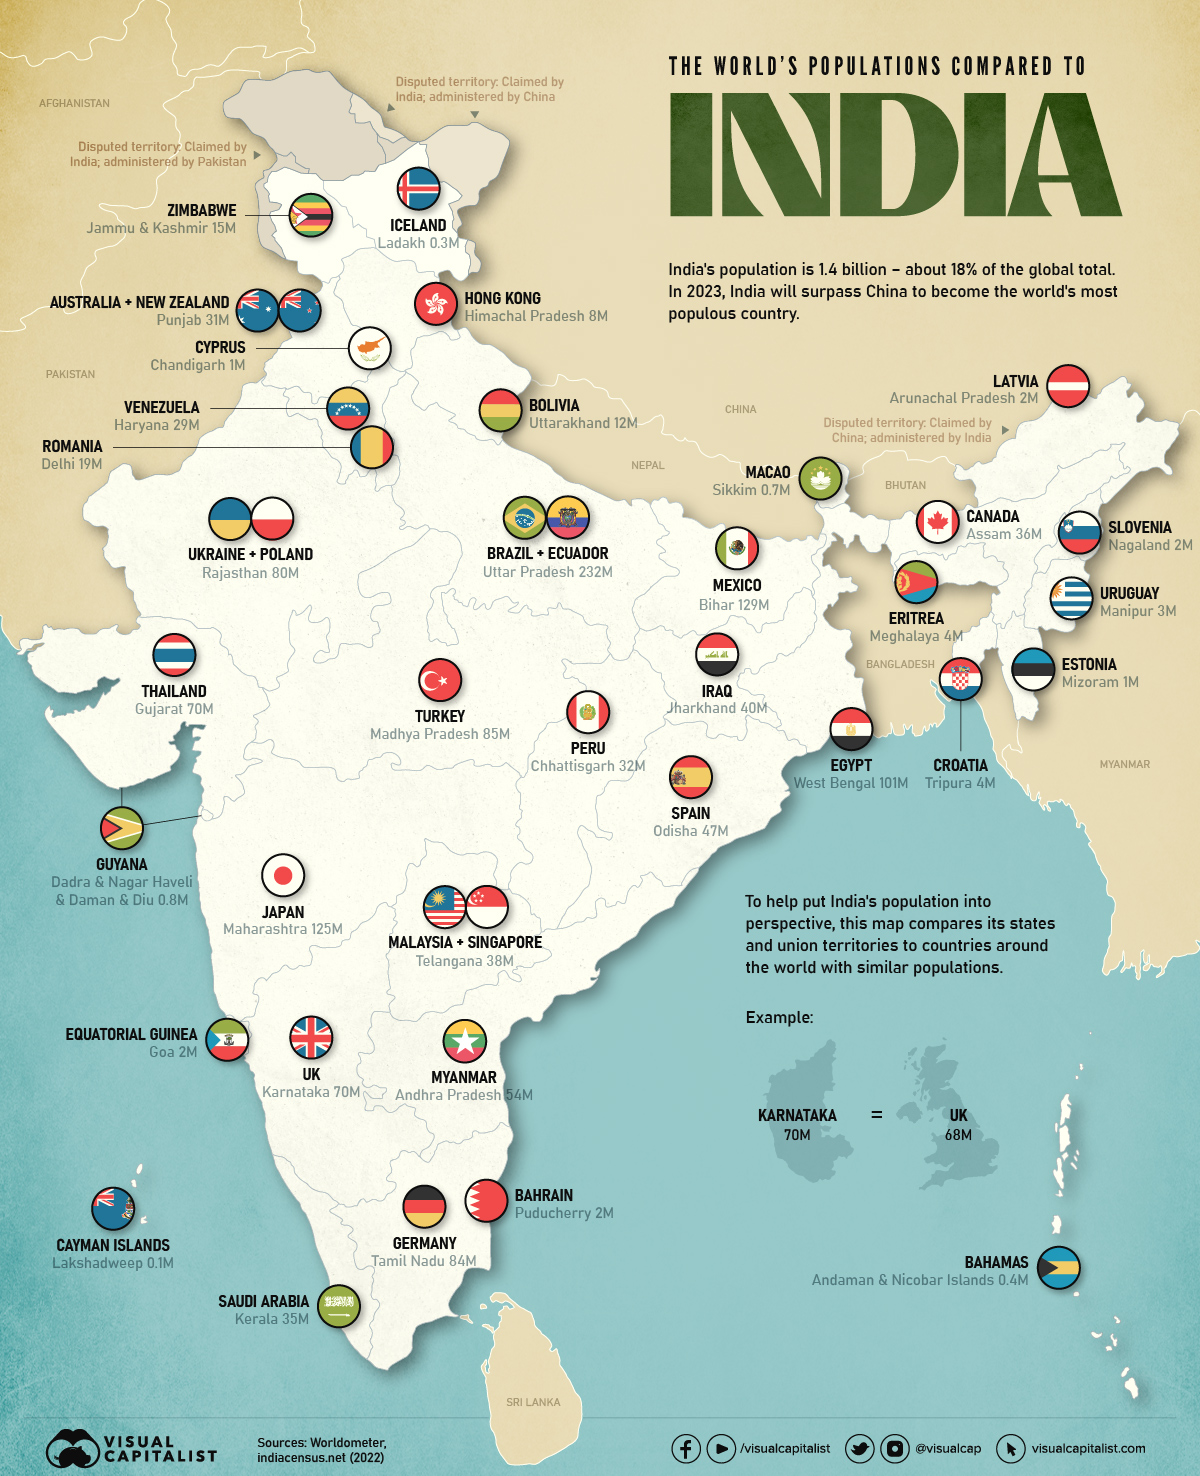 India-states-compared-countries-MAIN-2.jpg